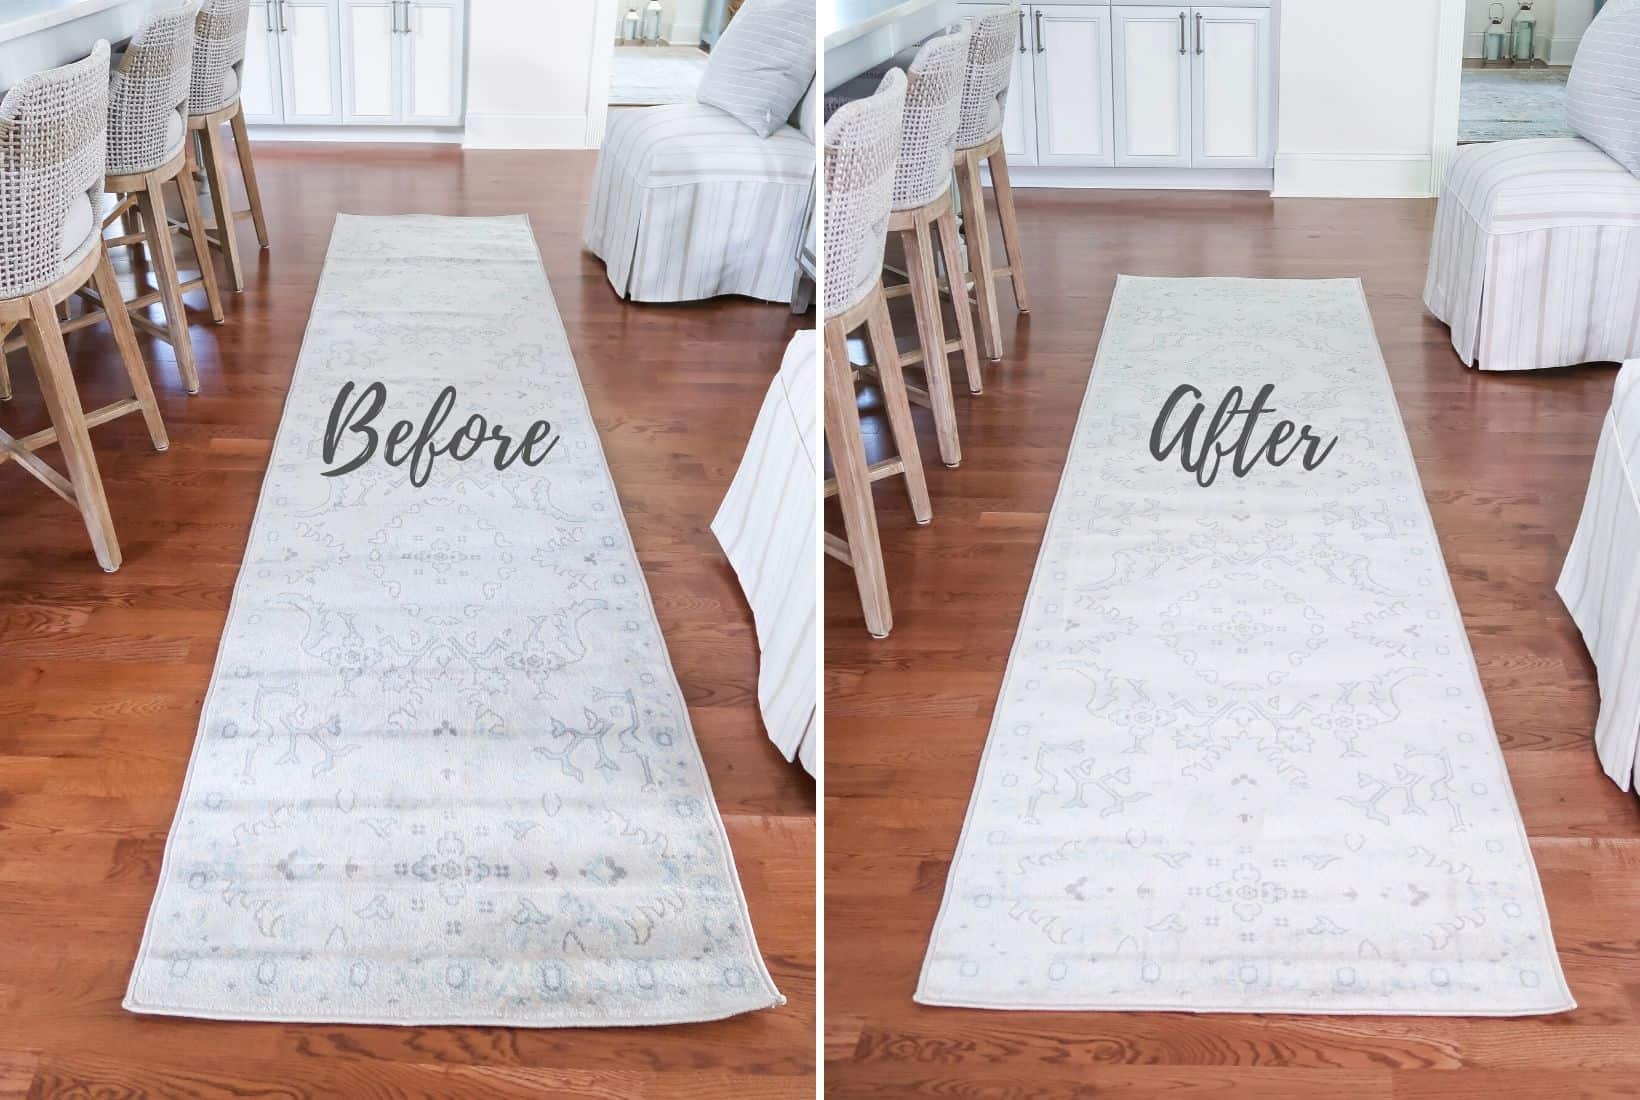 Remove New Rug Wrinkles Fast Porch, How To Make Rug Stay Flat